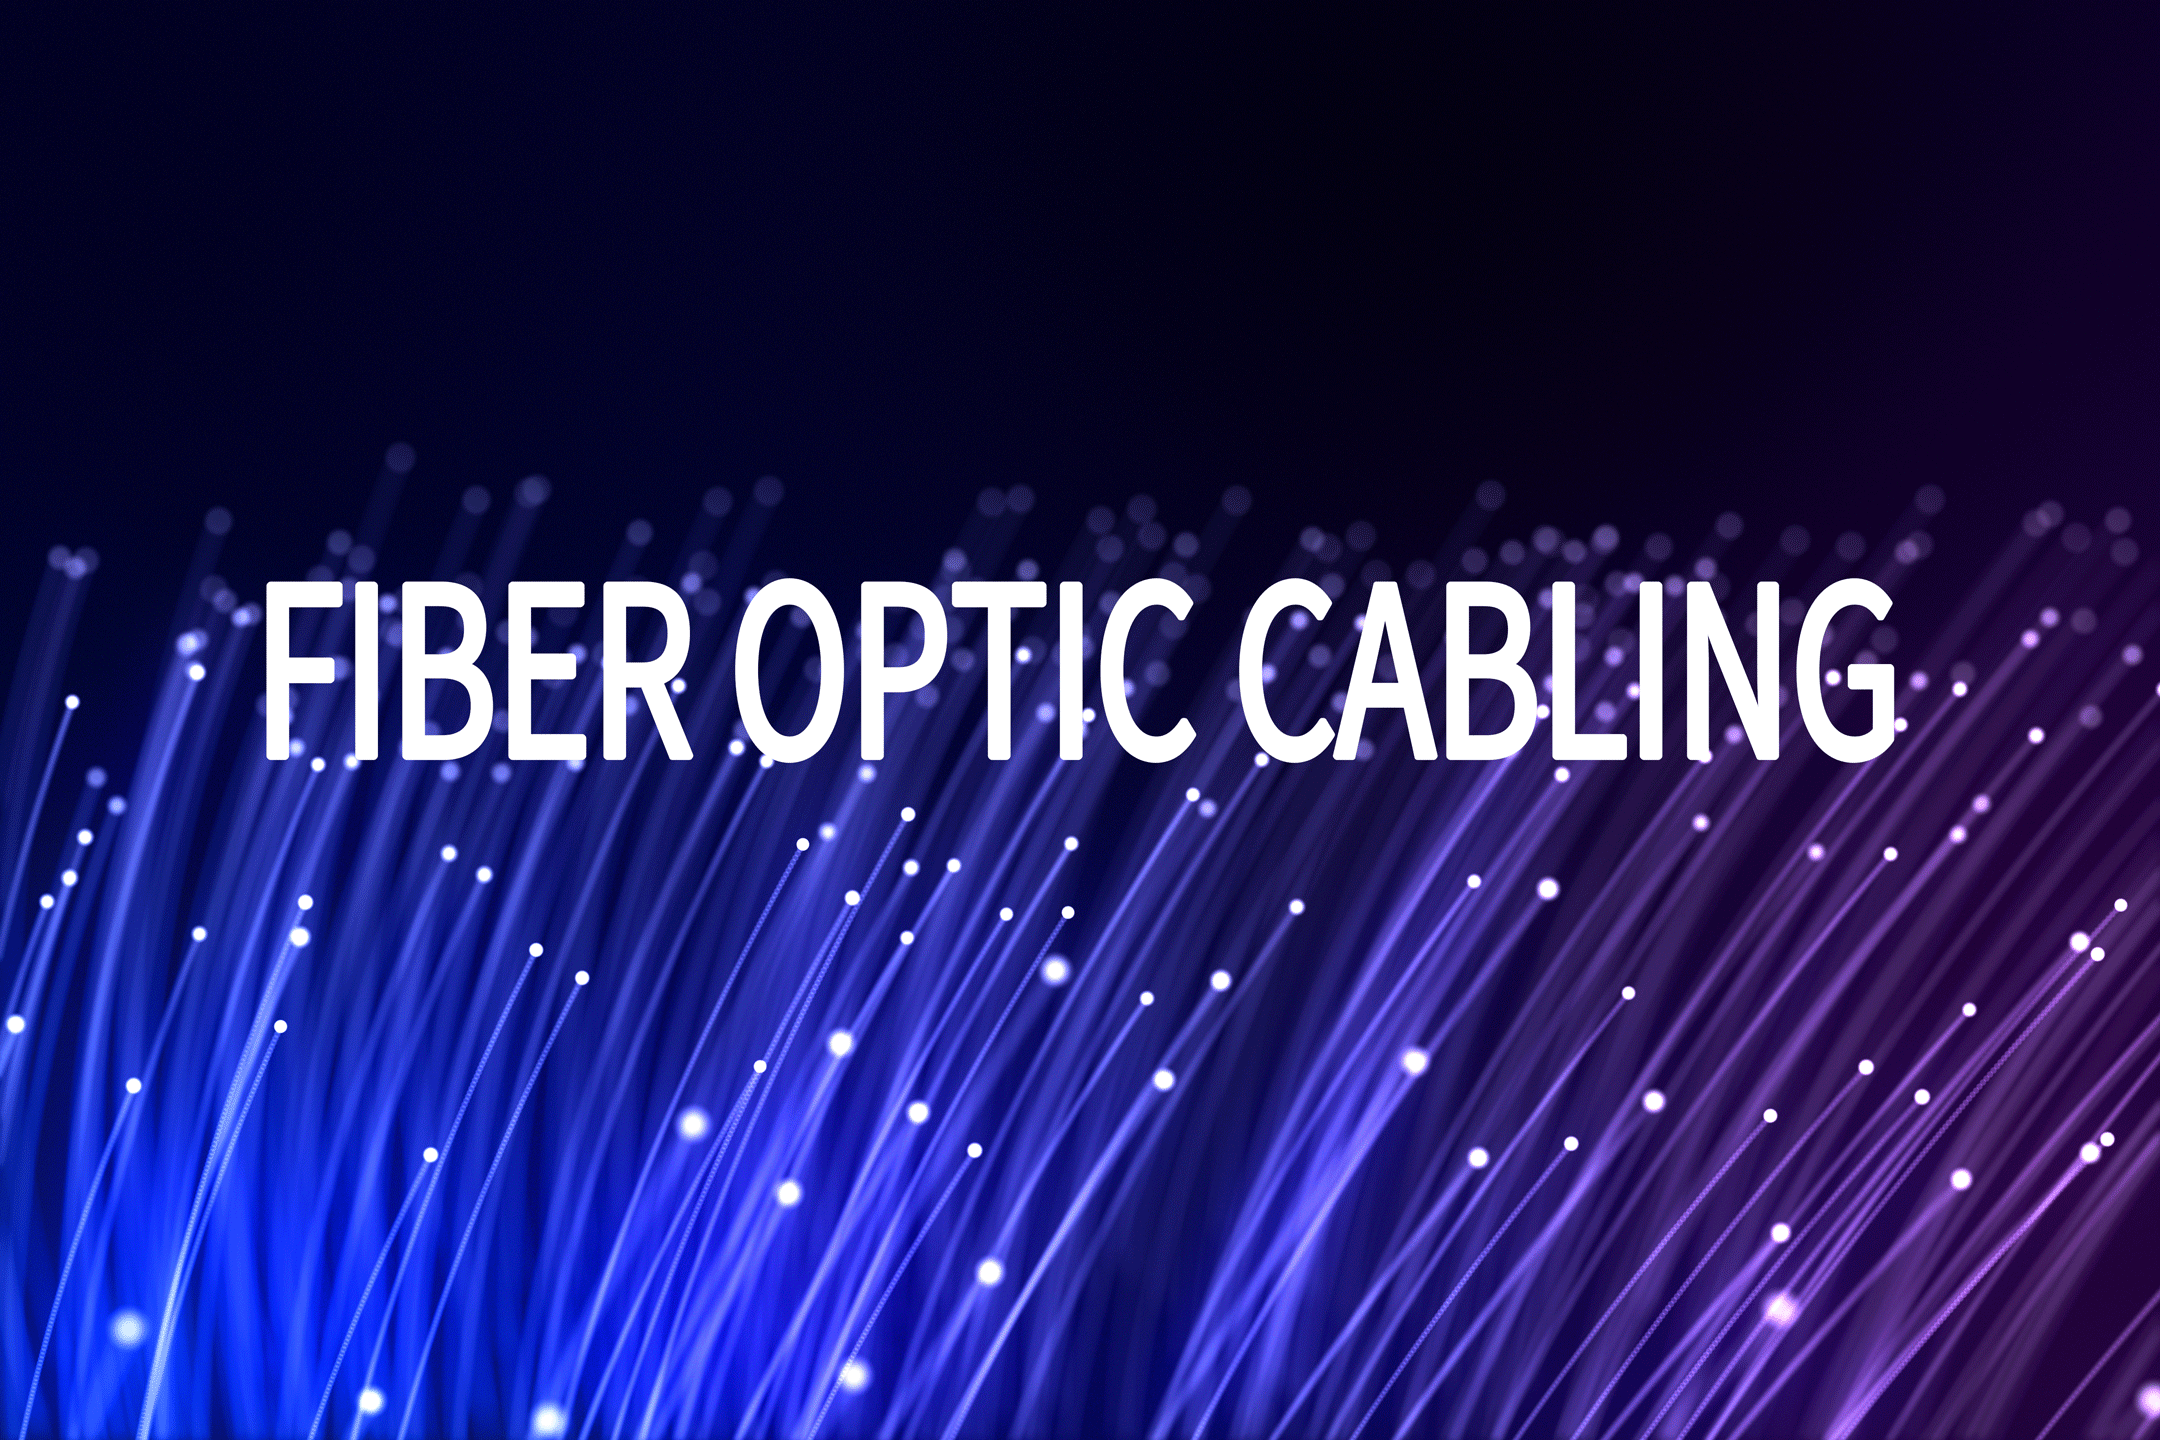 The right assistant for fiber optic cabling